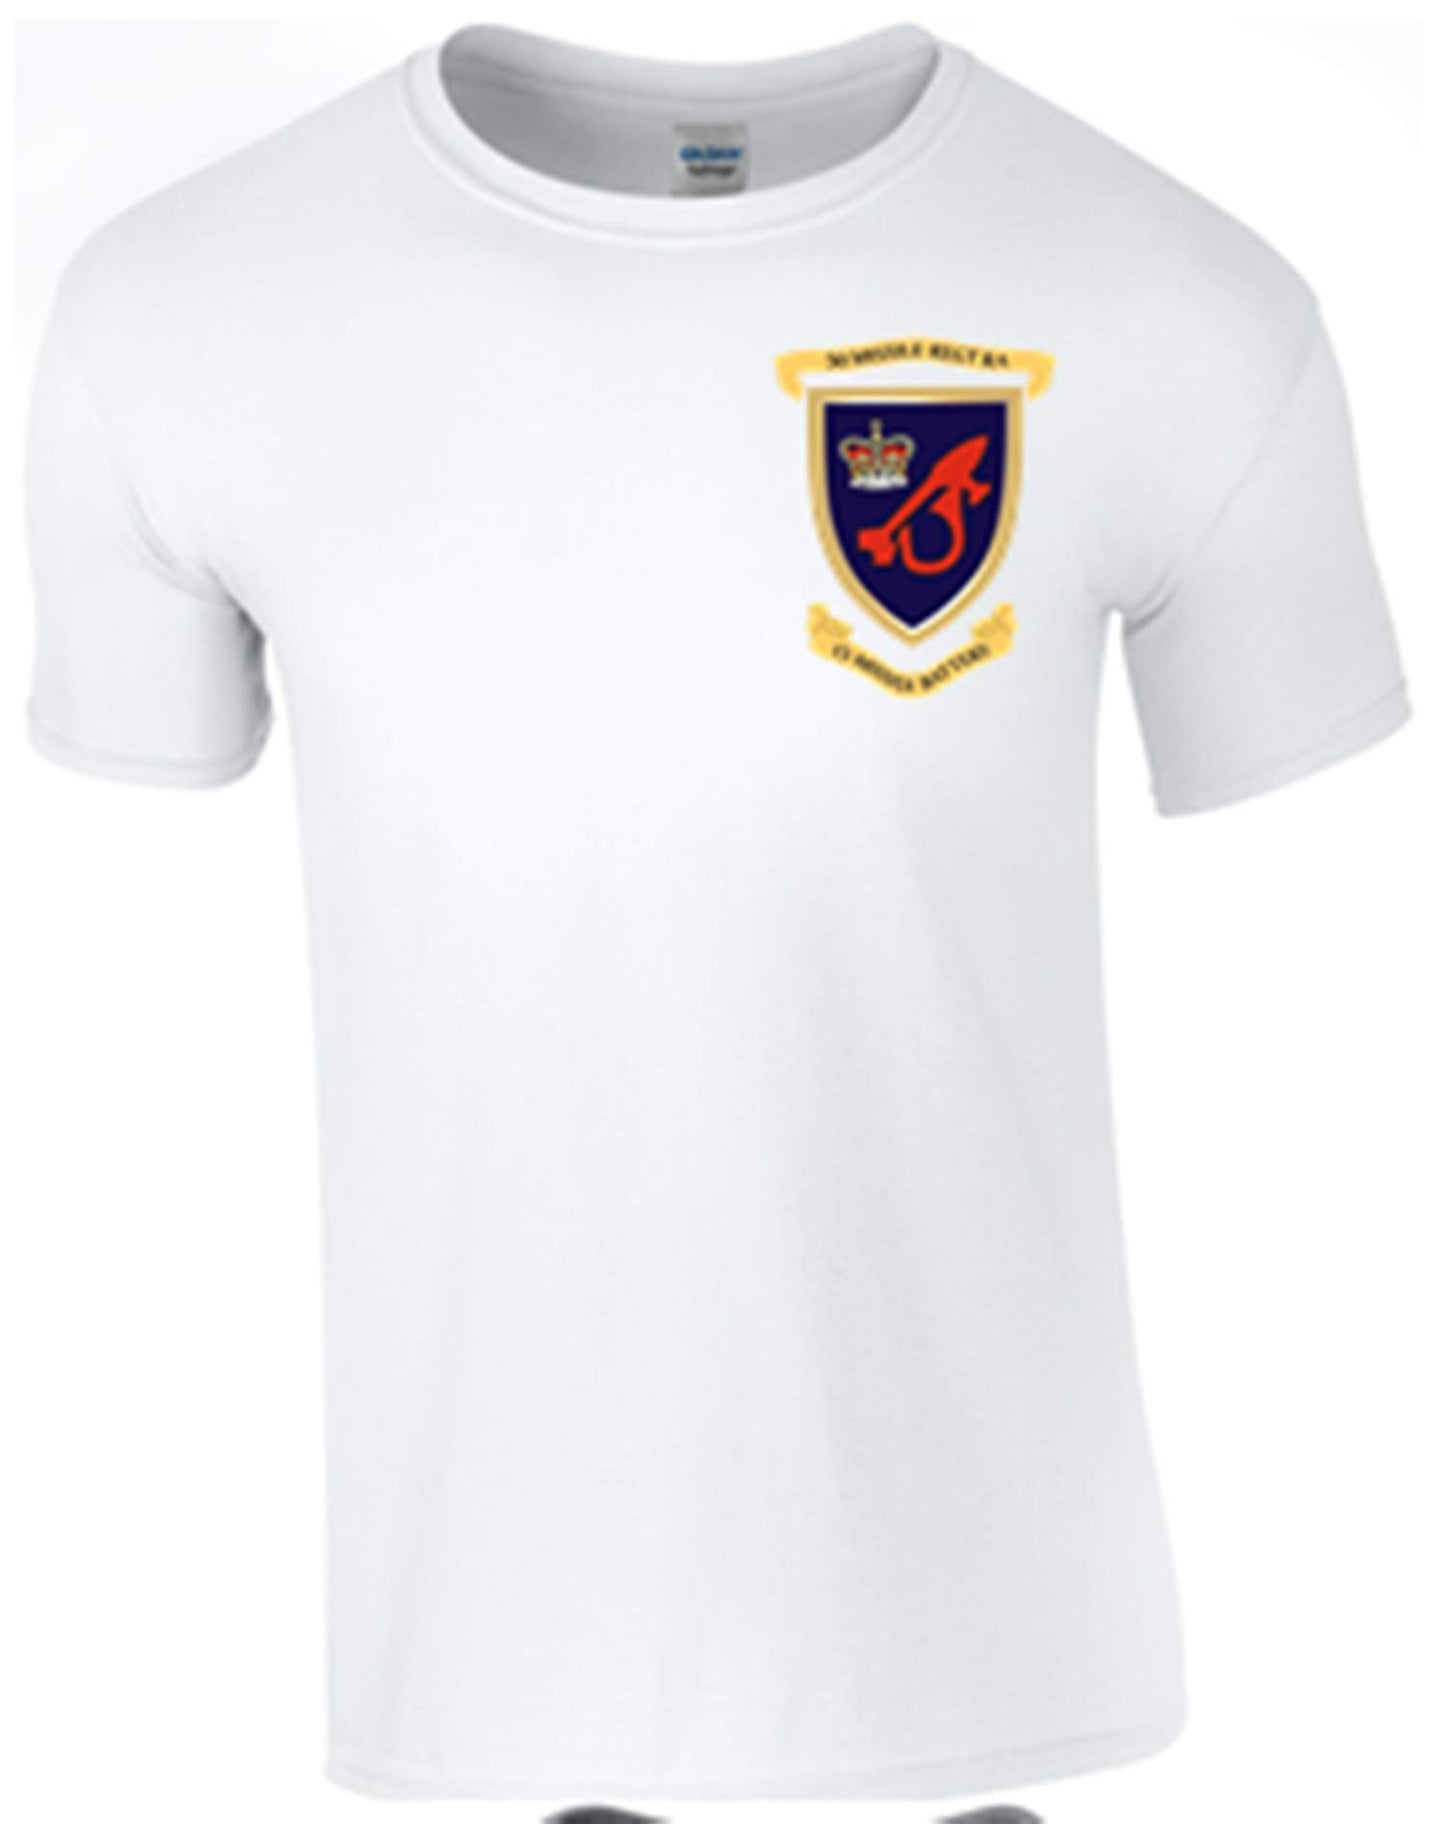 Army 1157 Kit Ministry of Defence T-Shirt 50 Missile Regiment with 15 Battery RA Logo on - Army 1157 kit White / 3XL Army 1157 Kit